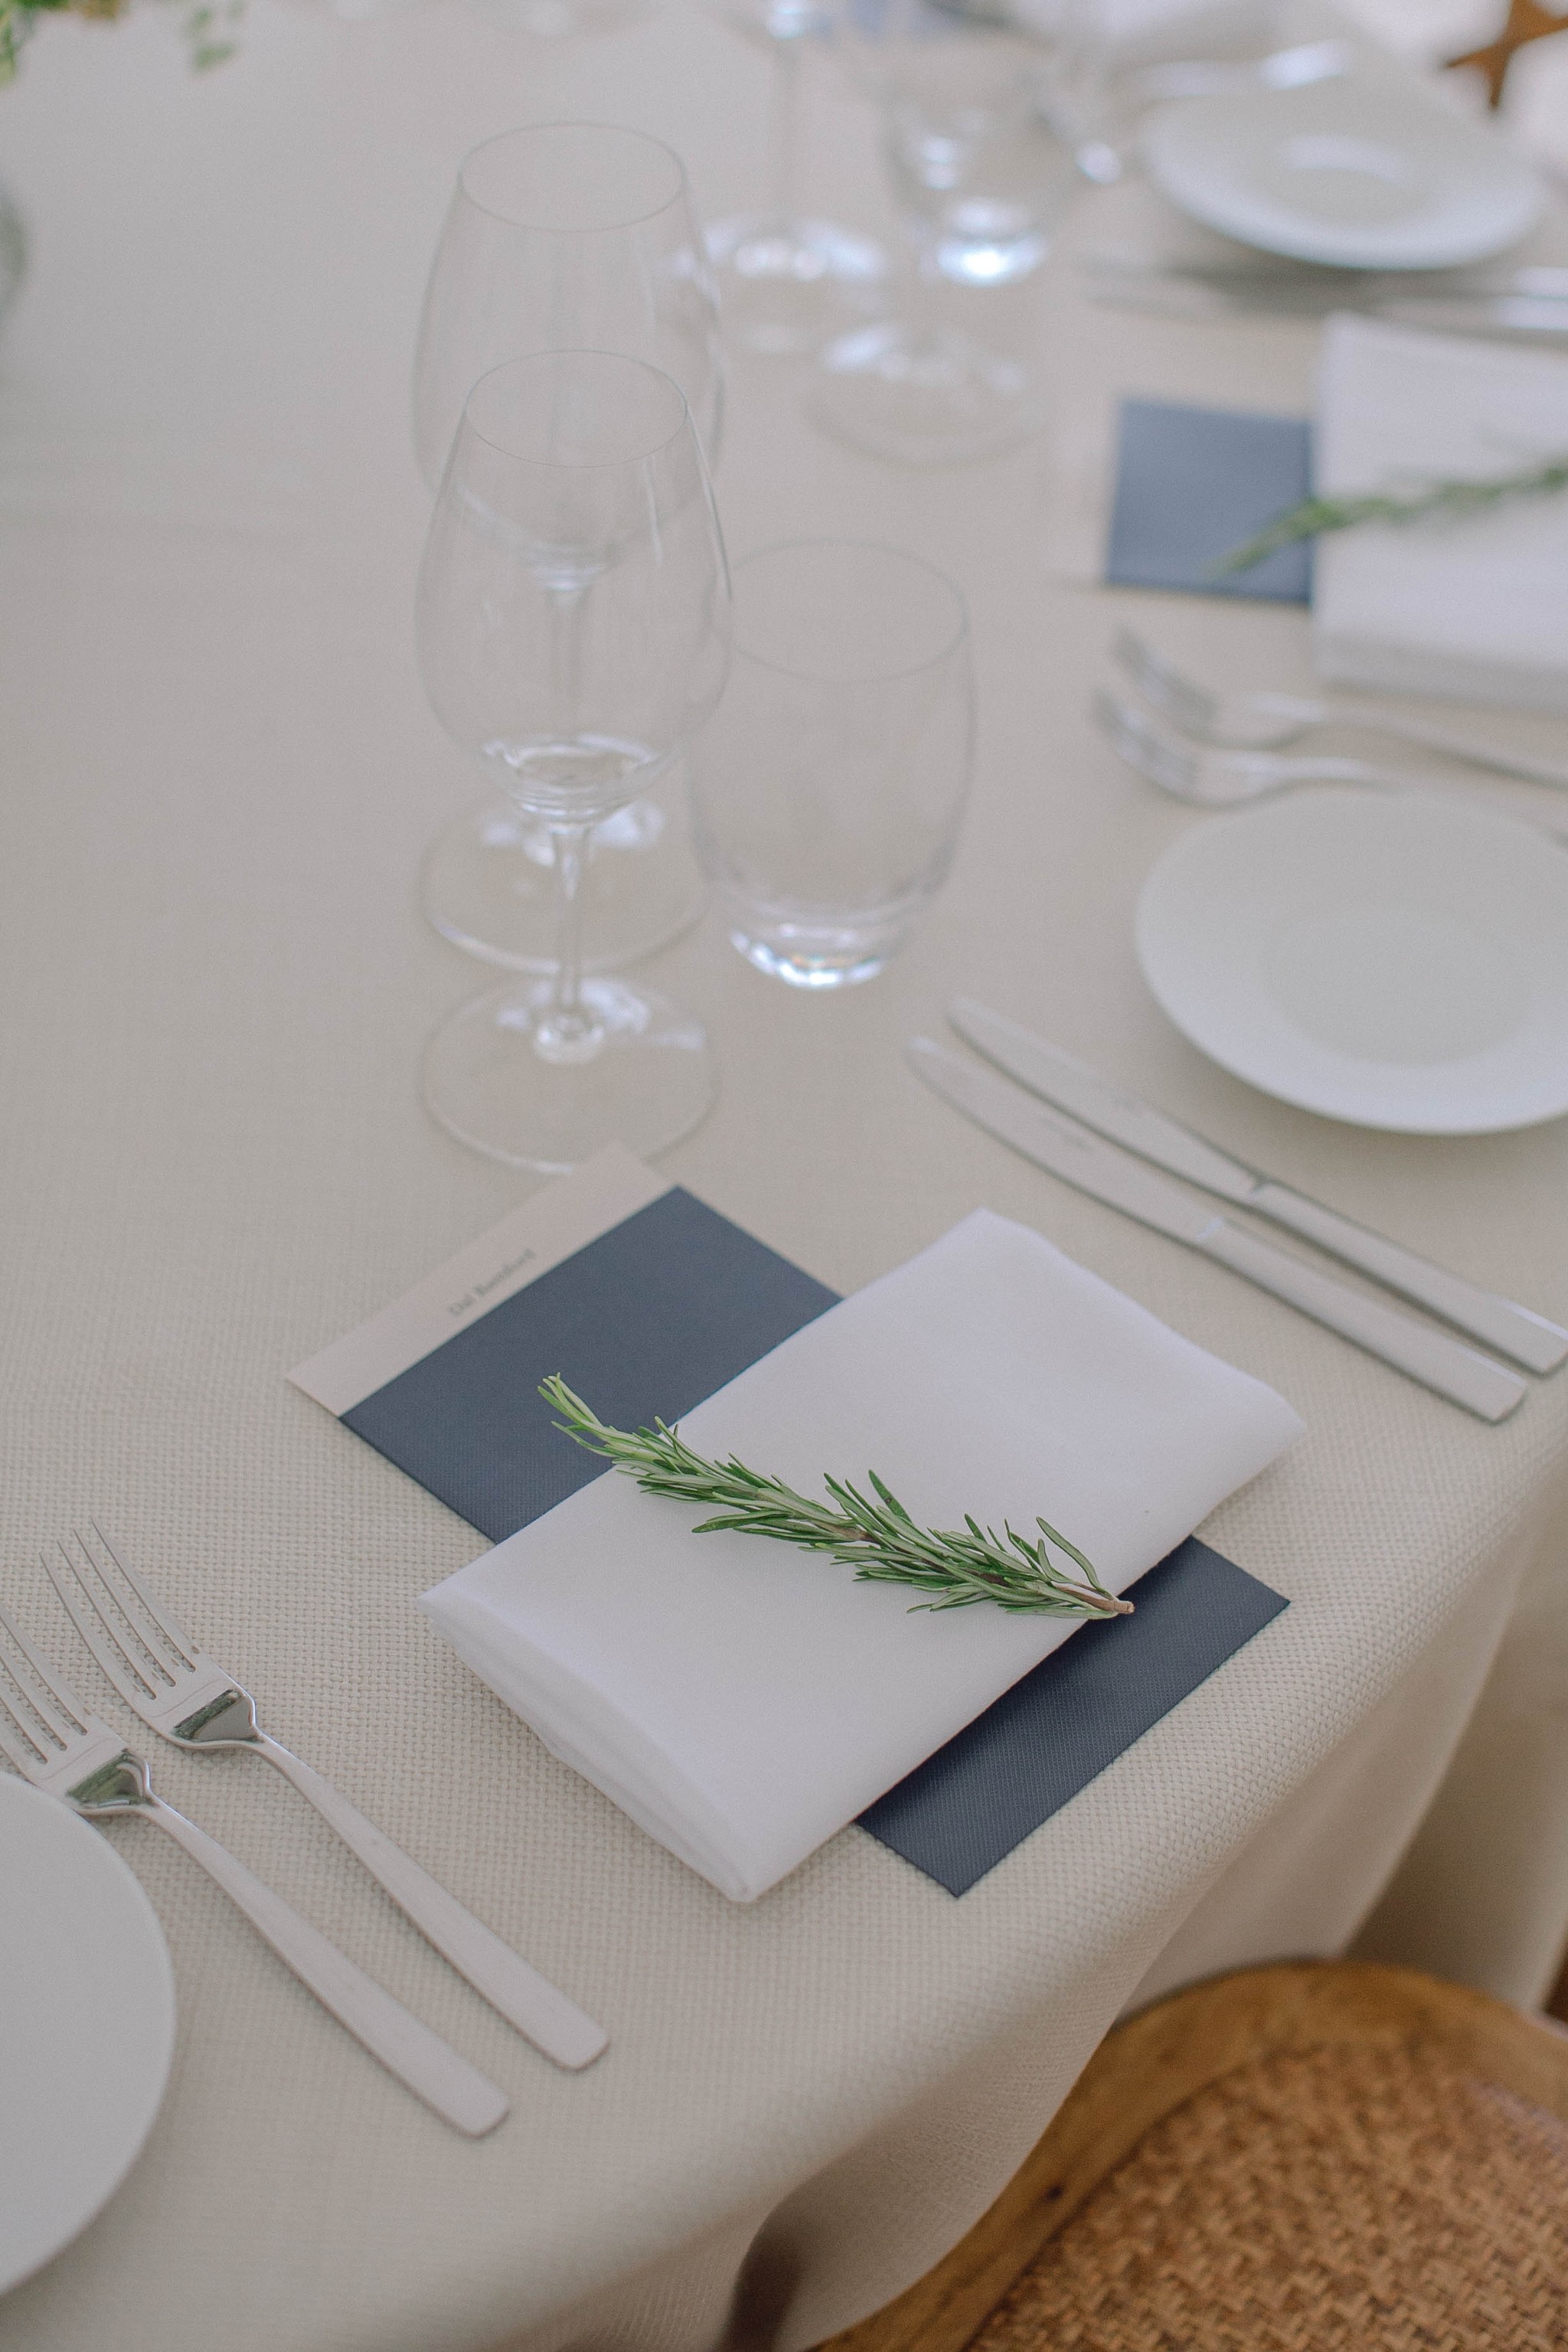 Menu on a table at a private event catered for by Marcus Belgravia